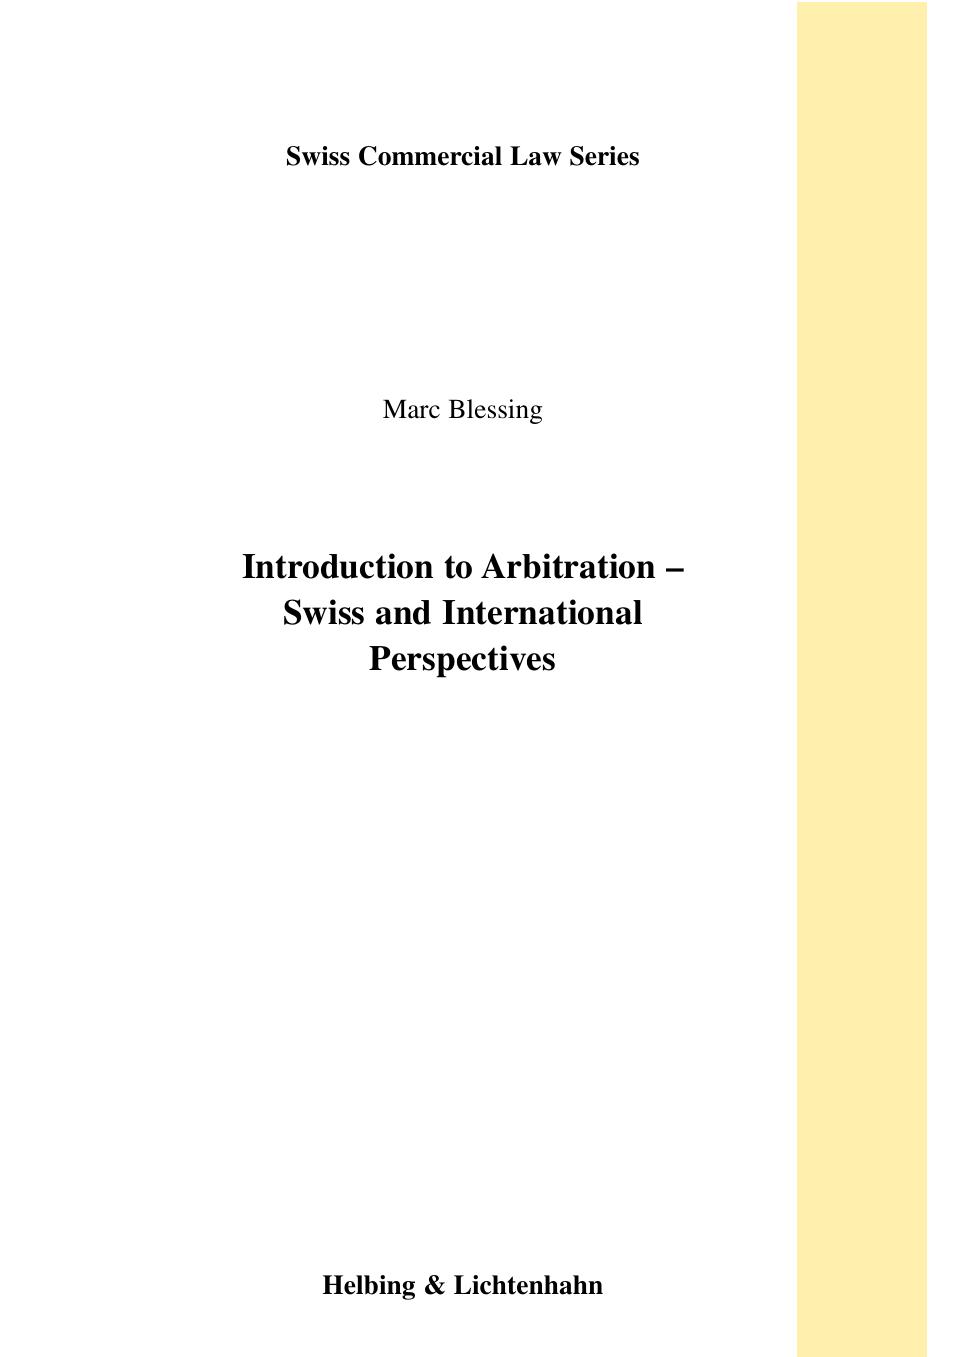 Introduction to Arbitration - Swiss and International Perspectives